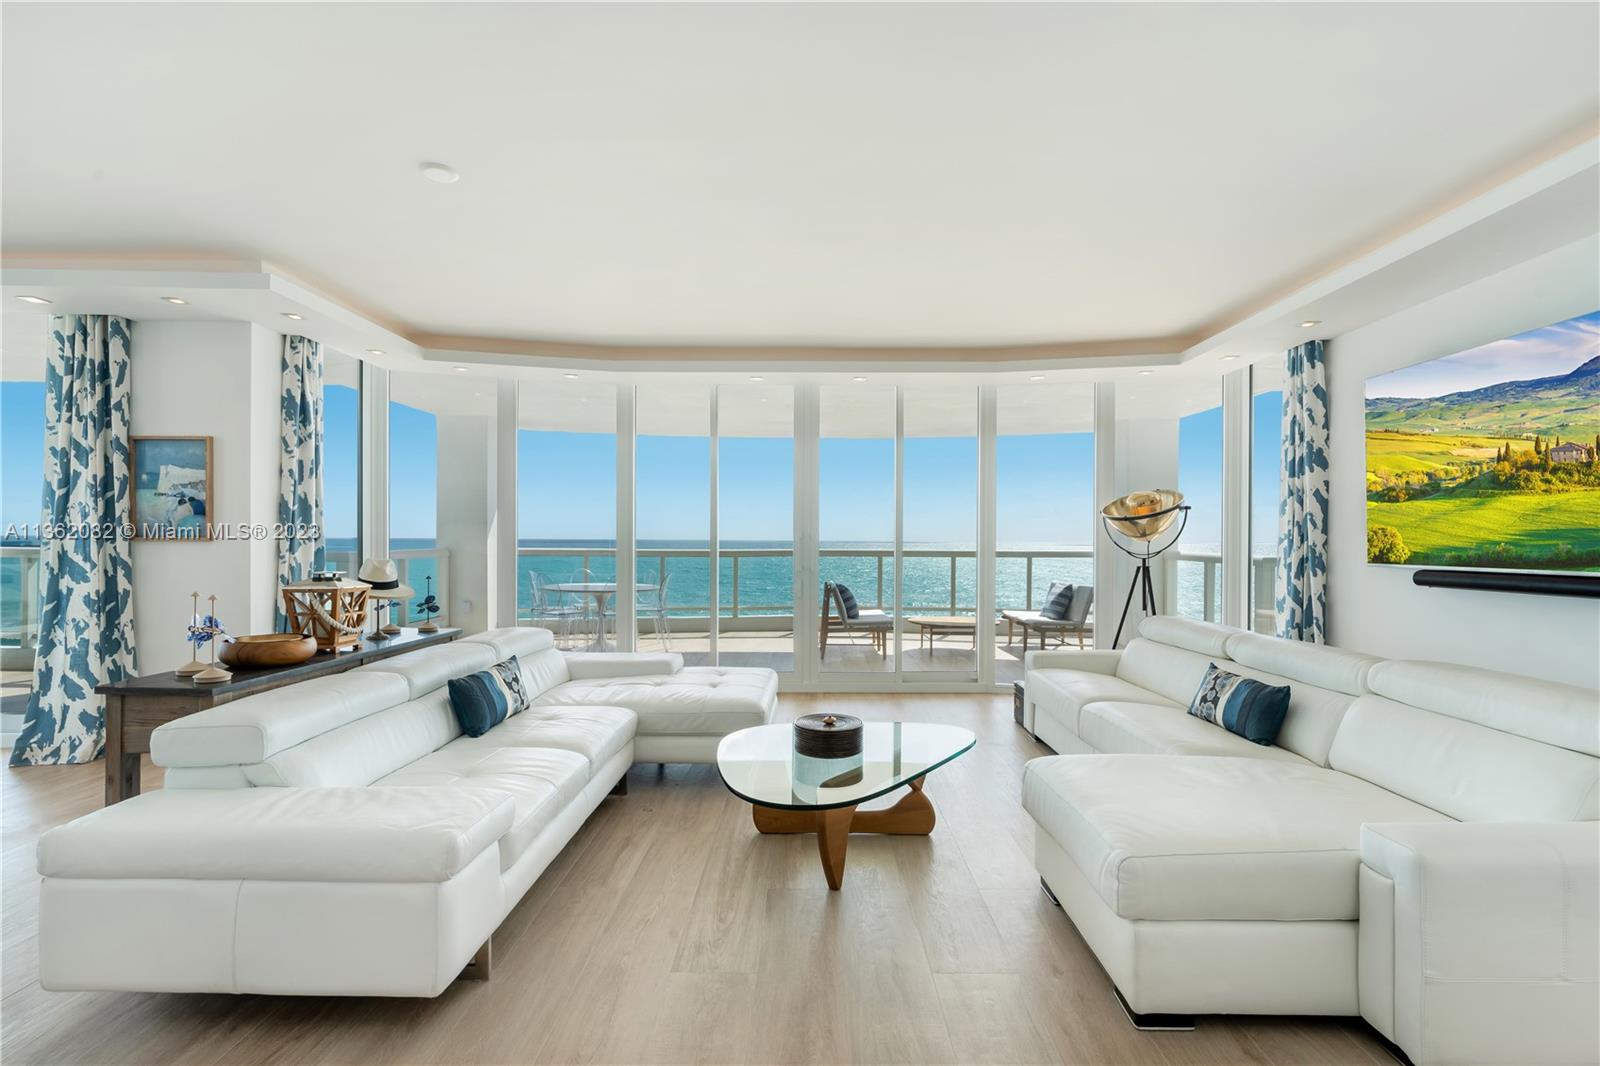 Welcome to this exceptional waterfront condo with direct oceanfront views. This 3BD/3BA was entirely remodeled and comes with a HUGE 750 SF balcony & endless ocean views. This spacious unit has 1,980 SF. All rooms have direct ocean views including the open dining room, large living room, and foyer. Kitchen also faces the water and it is elegantly designed featuring Miele appliances. Building offers 24 hours security and amenities include a heated pool, Jacuzzi, sauna, gym, tennis court, meeting/party room, security, concierge and on-site management. La Tour condo building is just south of the Fontainebleau, Soho House and North of the Confidante and Faena Hotel.